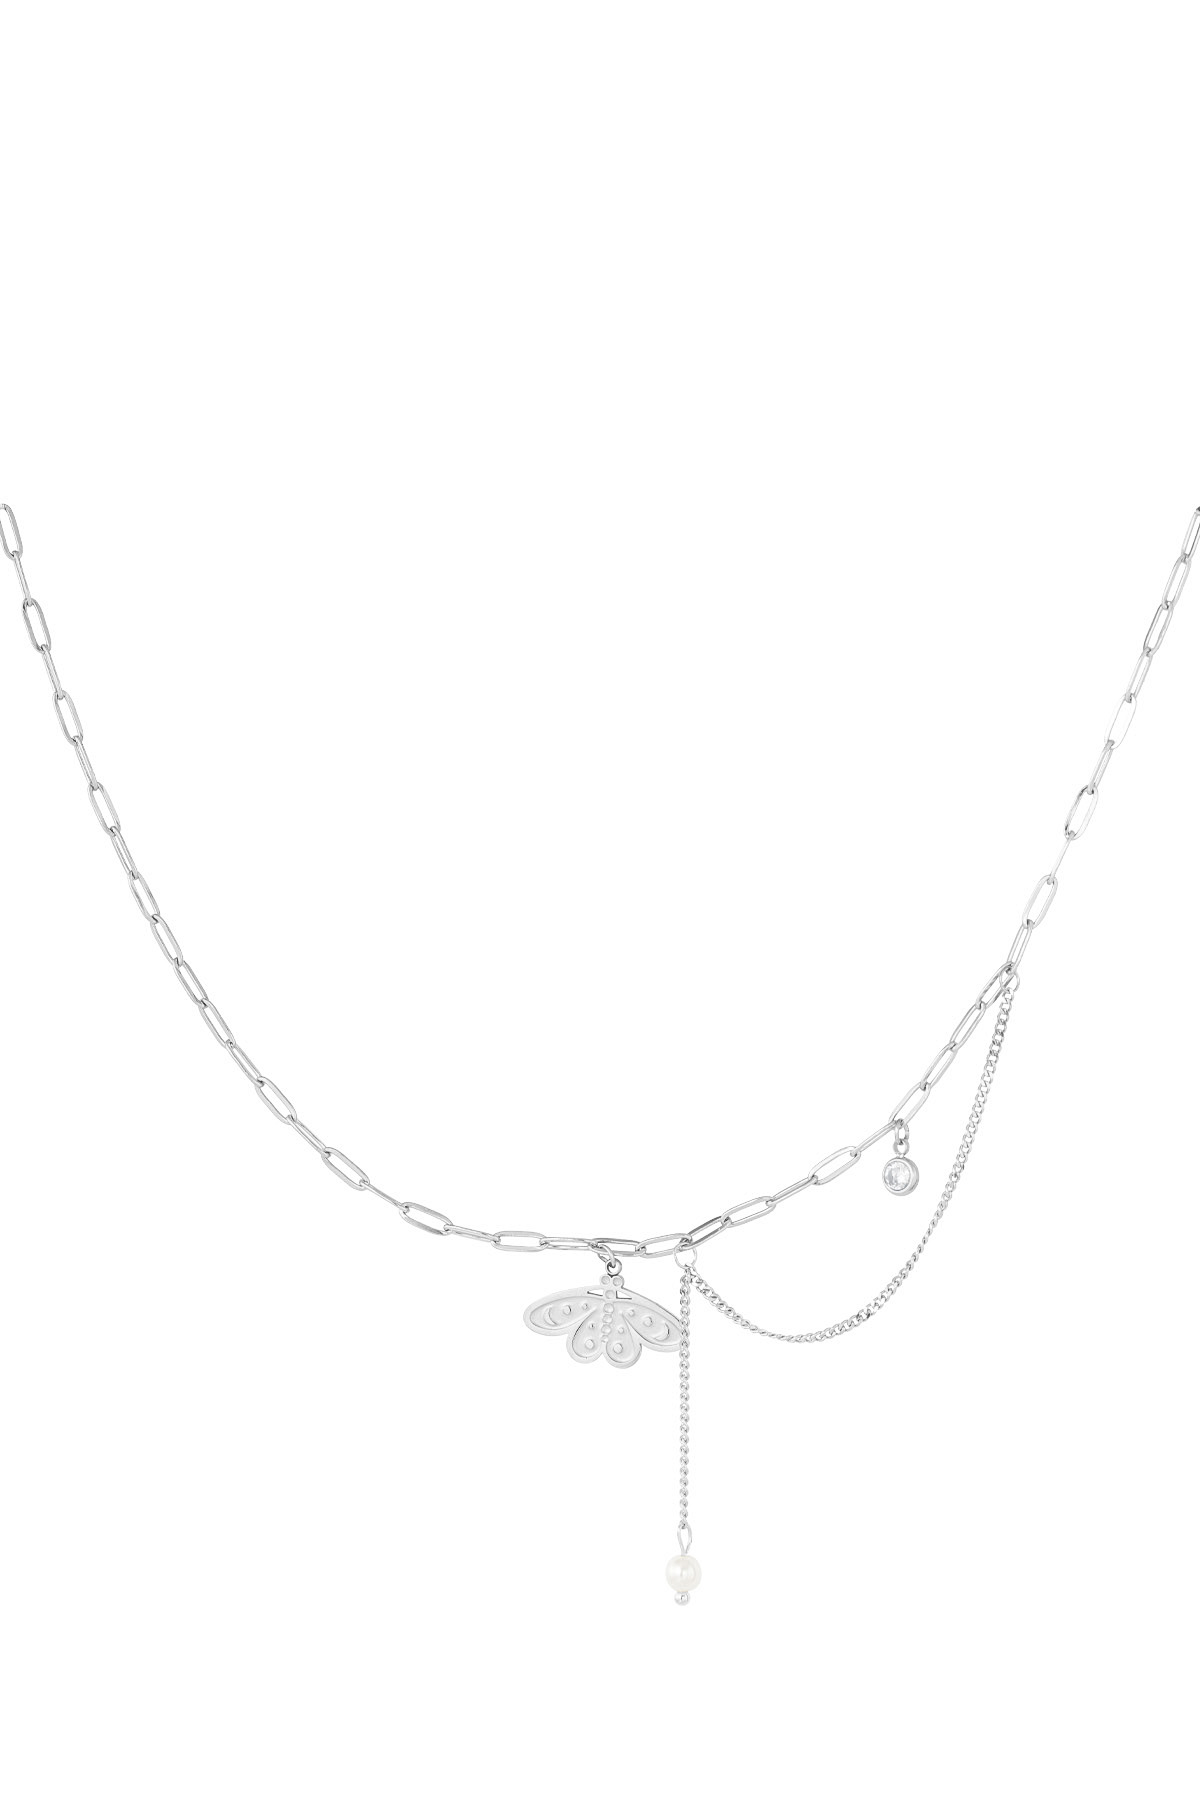 Butterfly charm necklace - silver